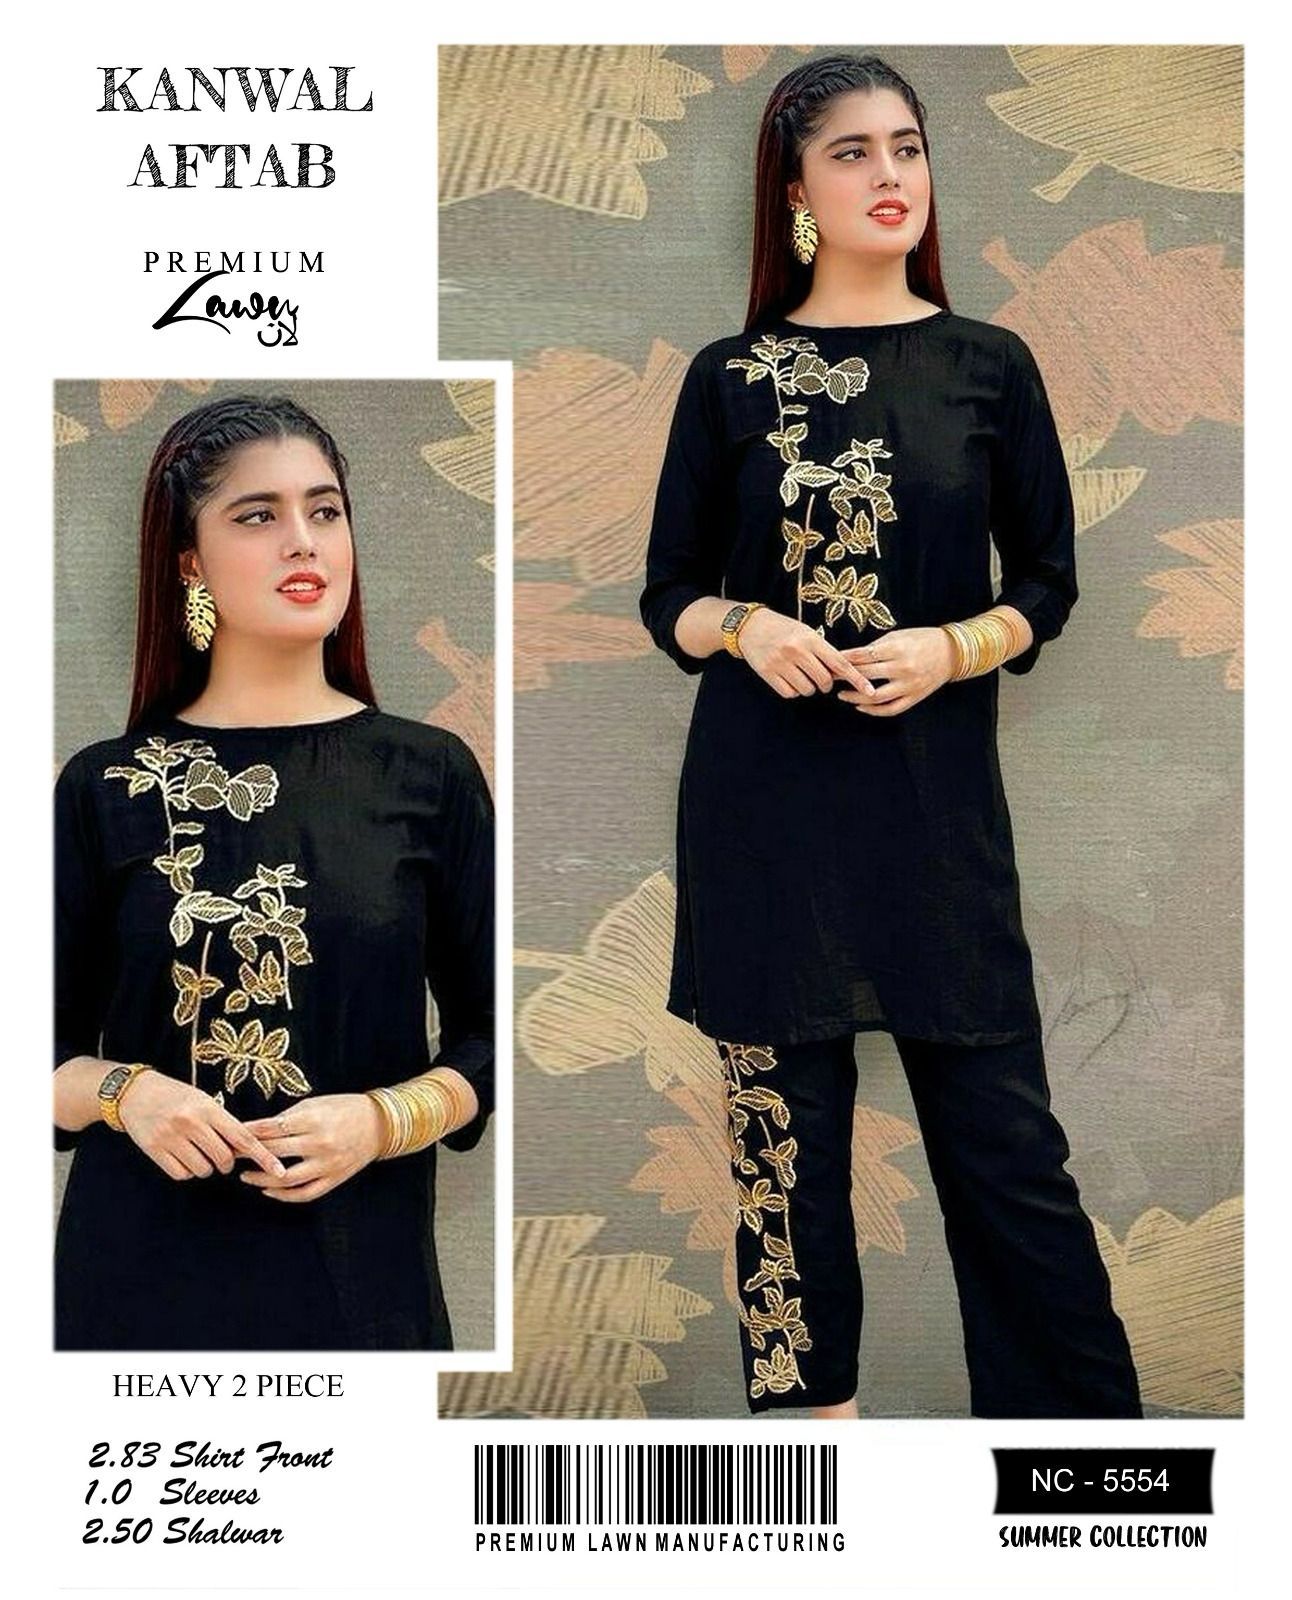 KANWAL AFTAB 3PC SUMMER COLLECTION REPLICA